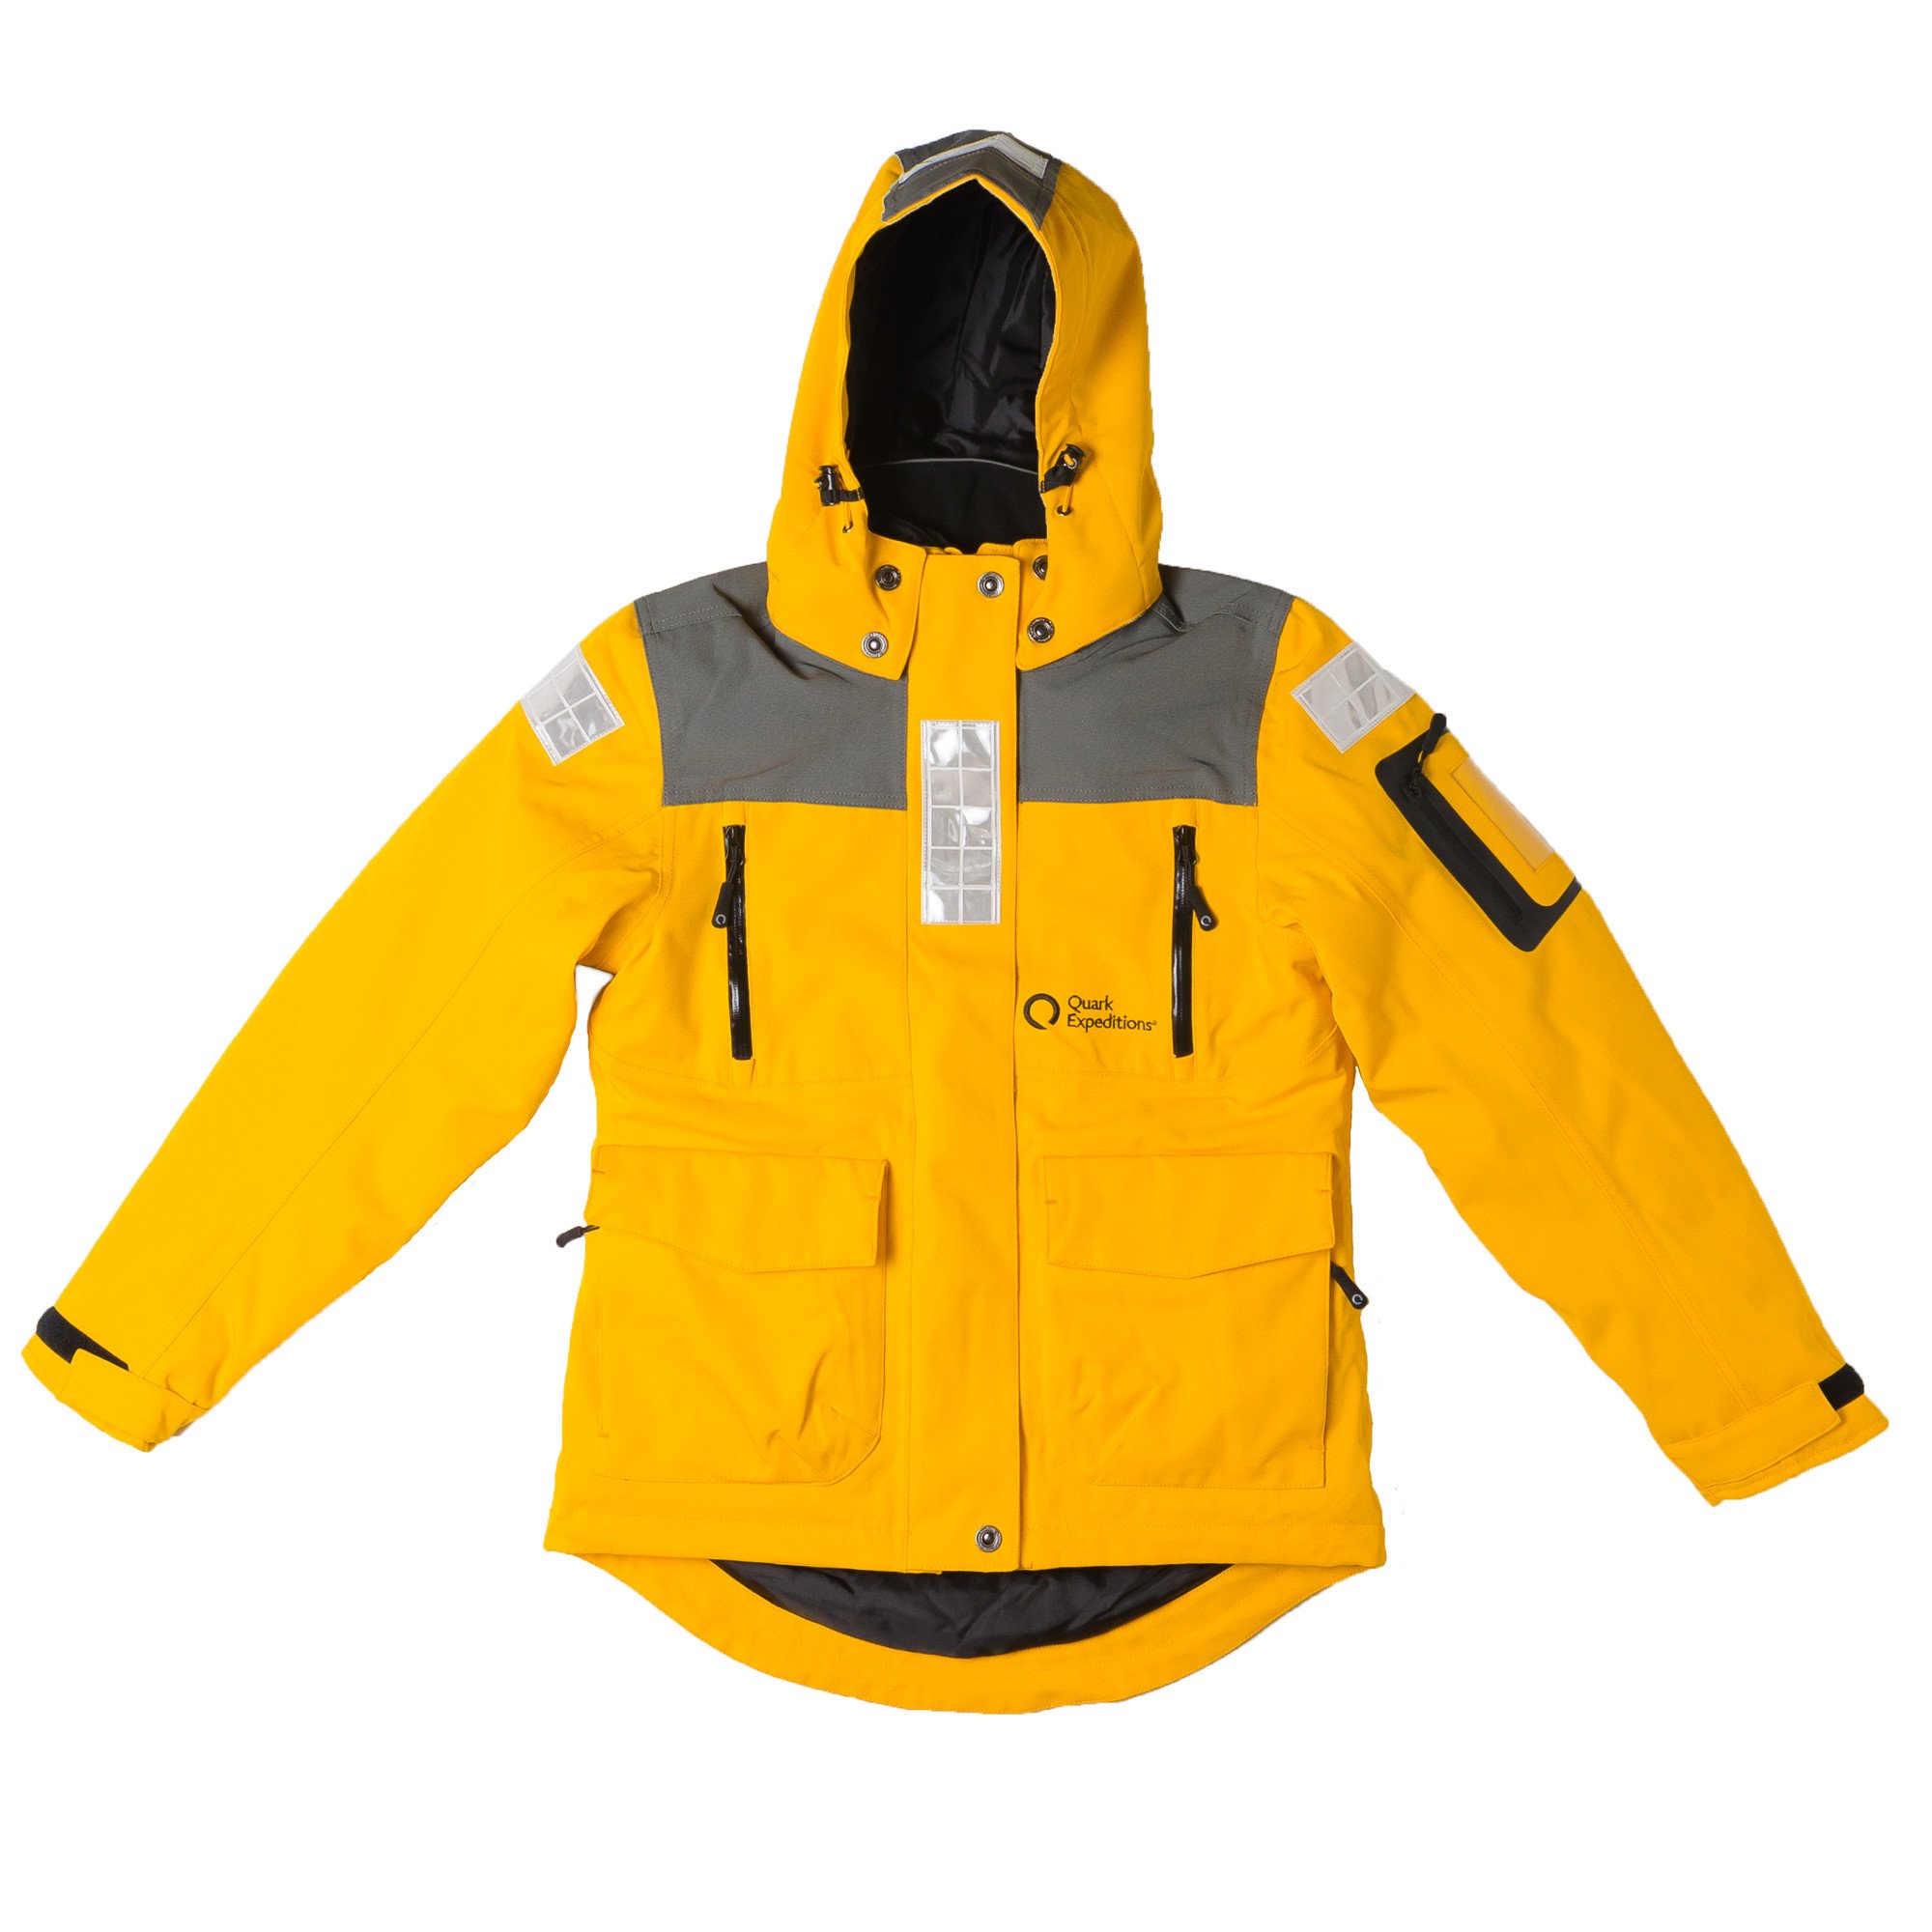 The complimentary Quark Parka is designed for all kinds of Arctic weather. 